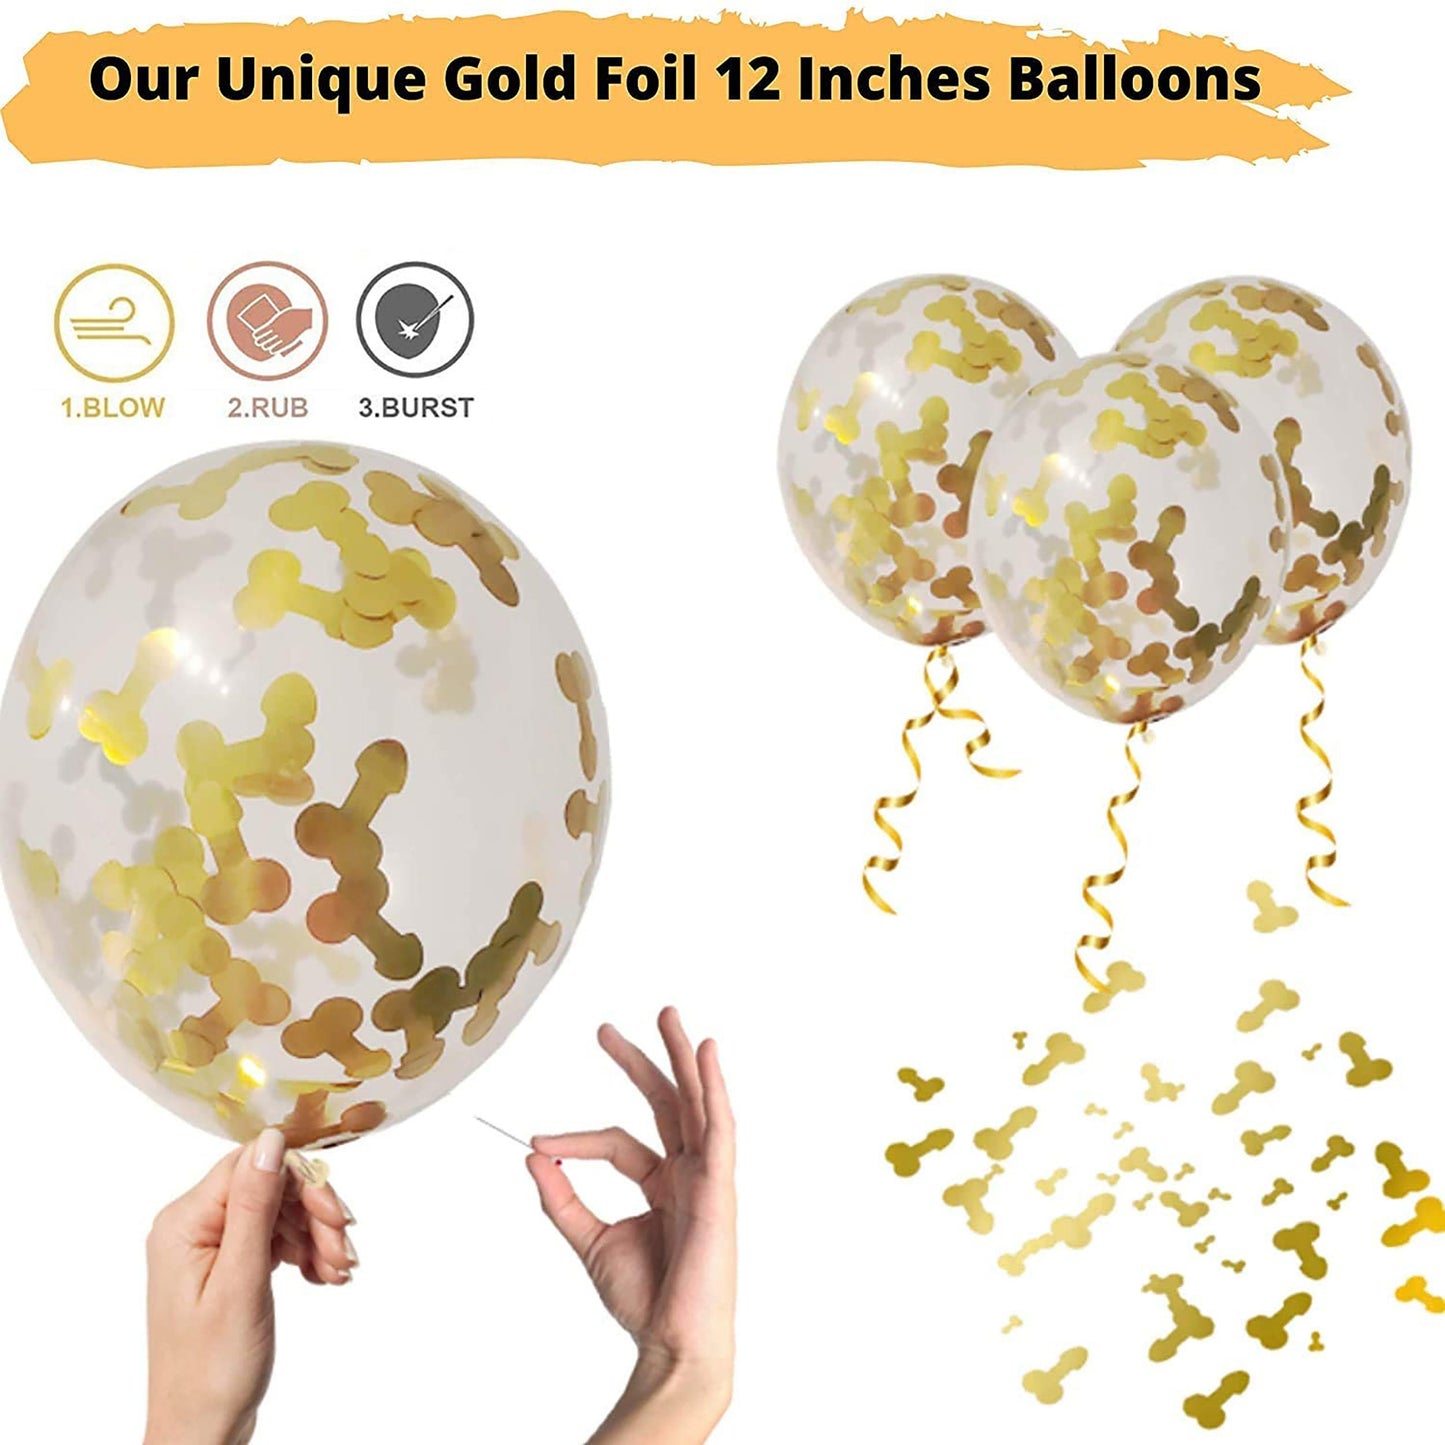 36 Bachelorette Party Decorations Naughty Balloons | Bridal Shower Supplies (White, Gold)